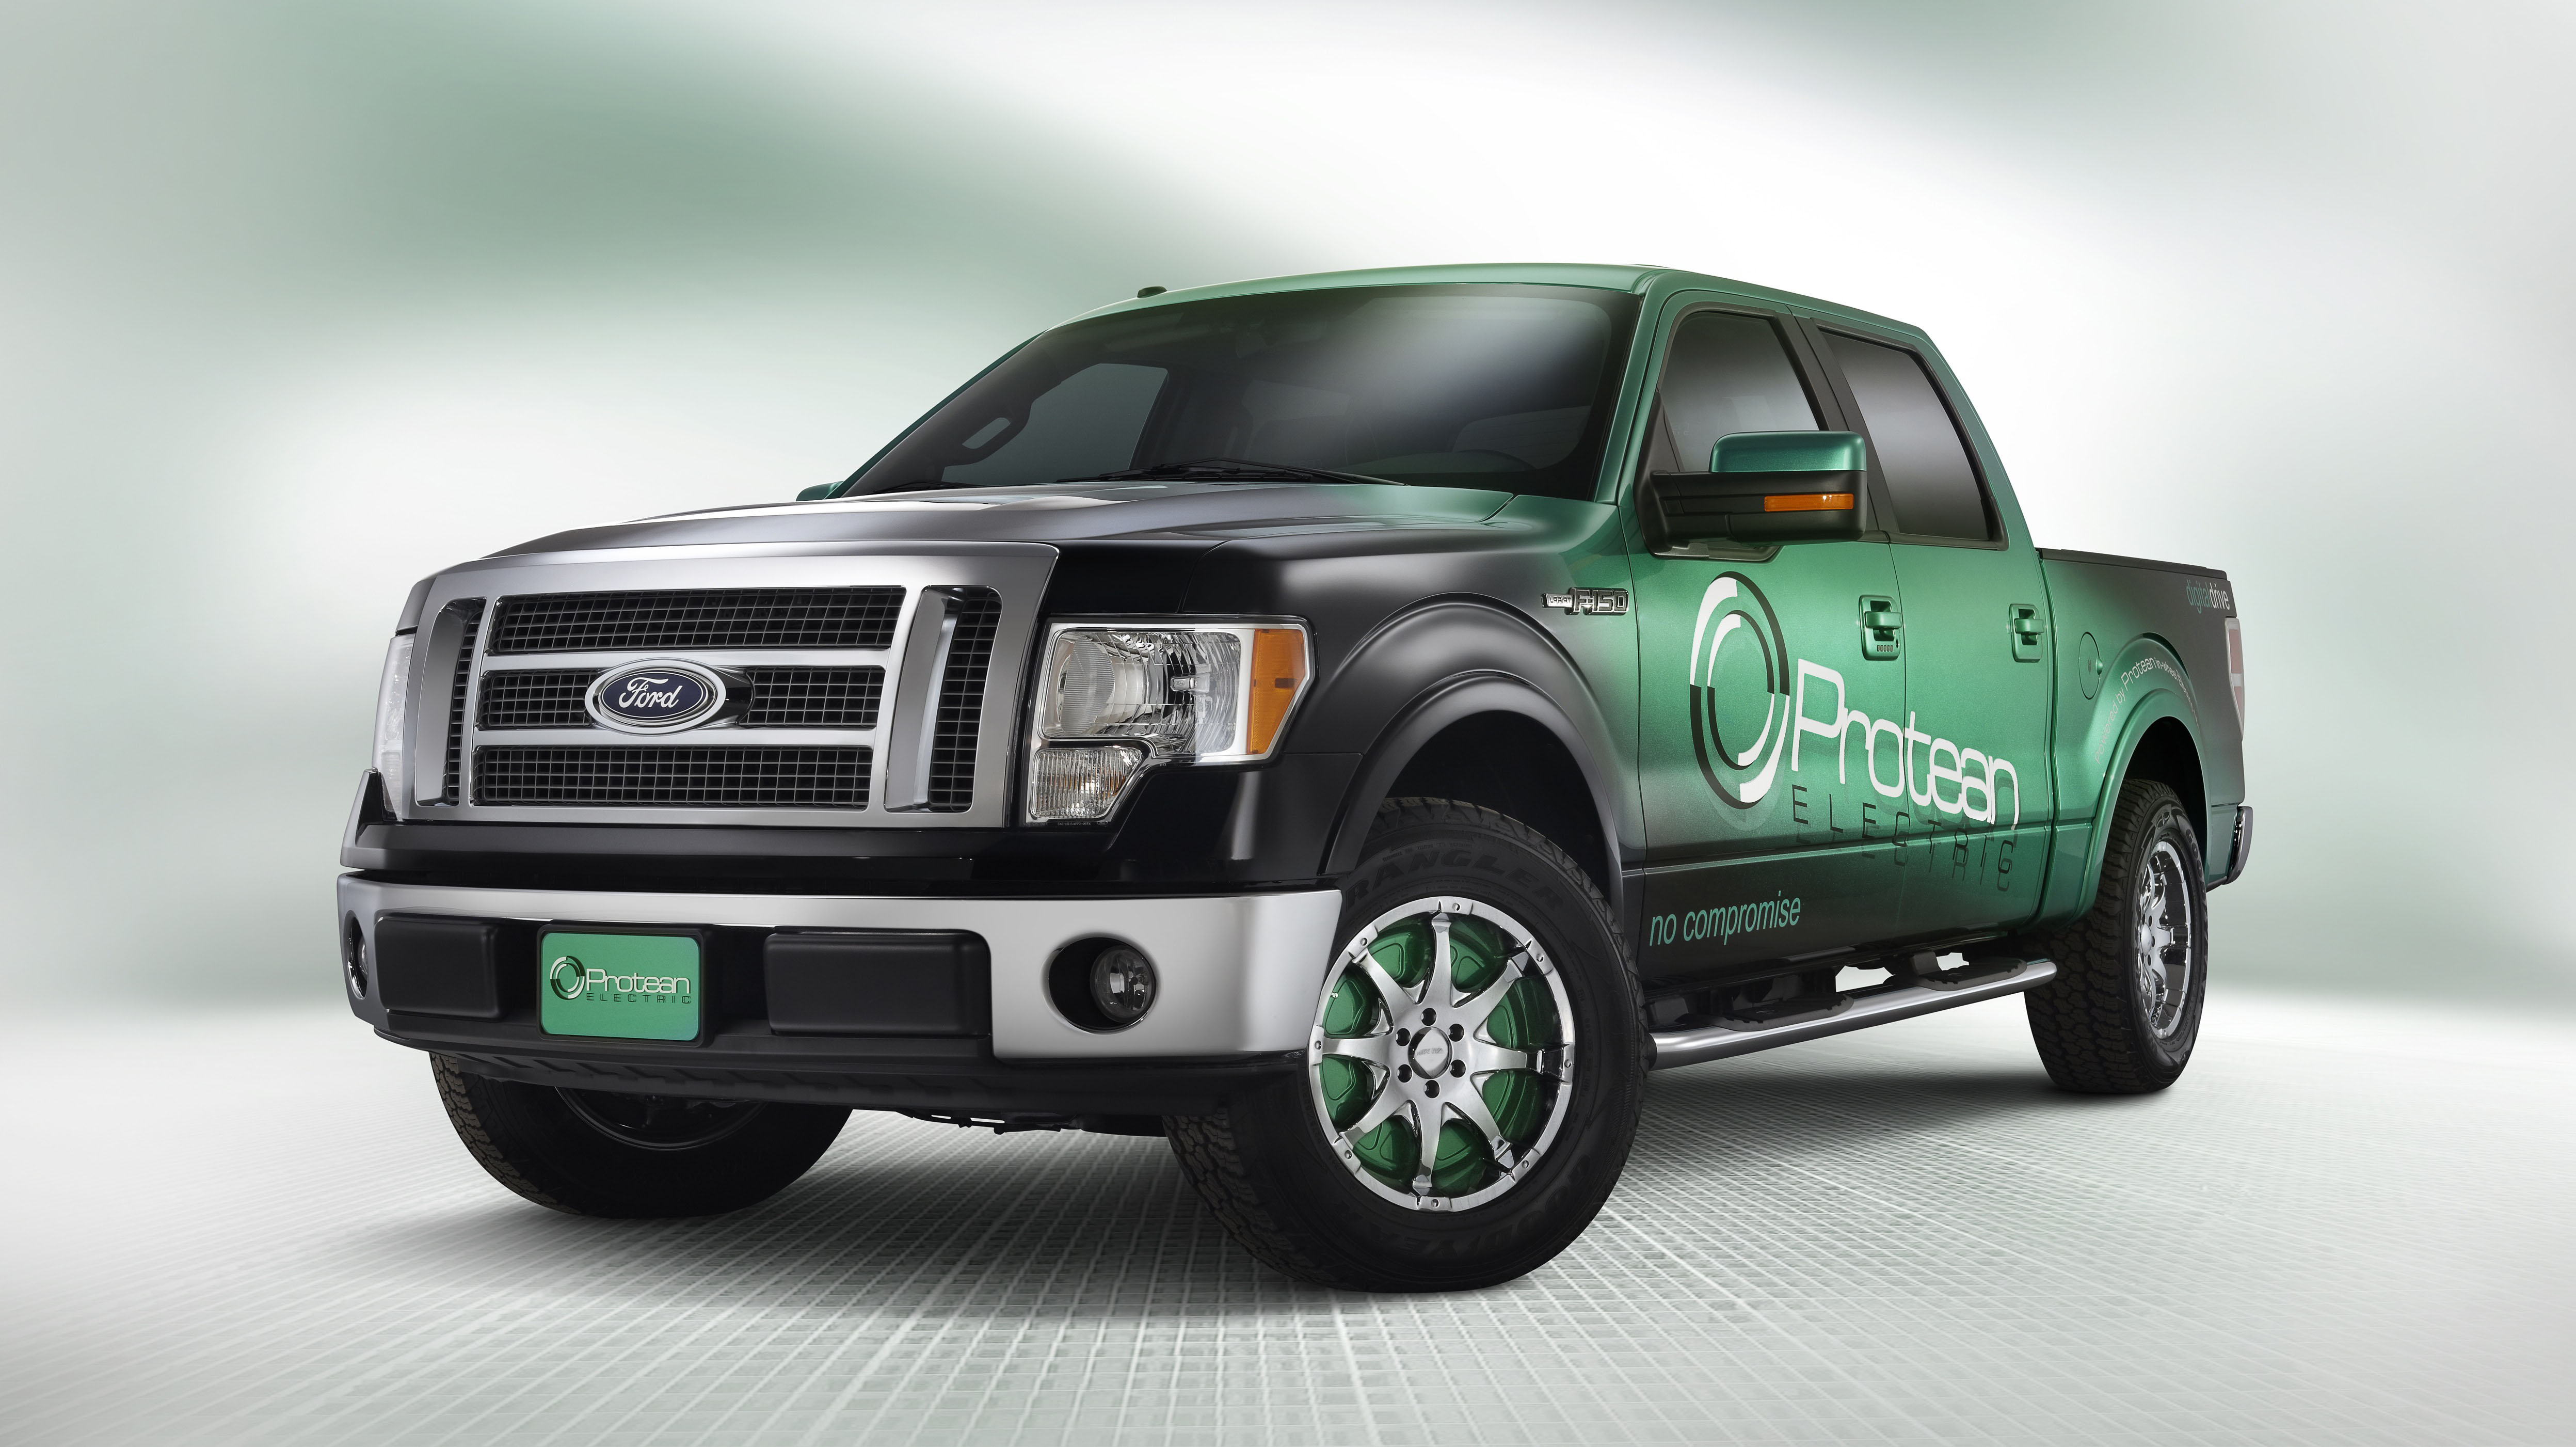 Protean Electric wants your wheels to power your car...